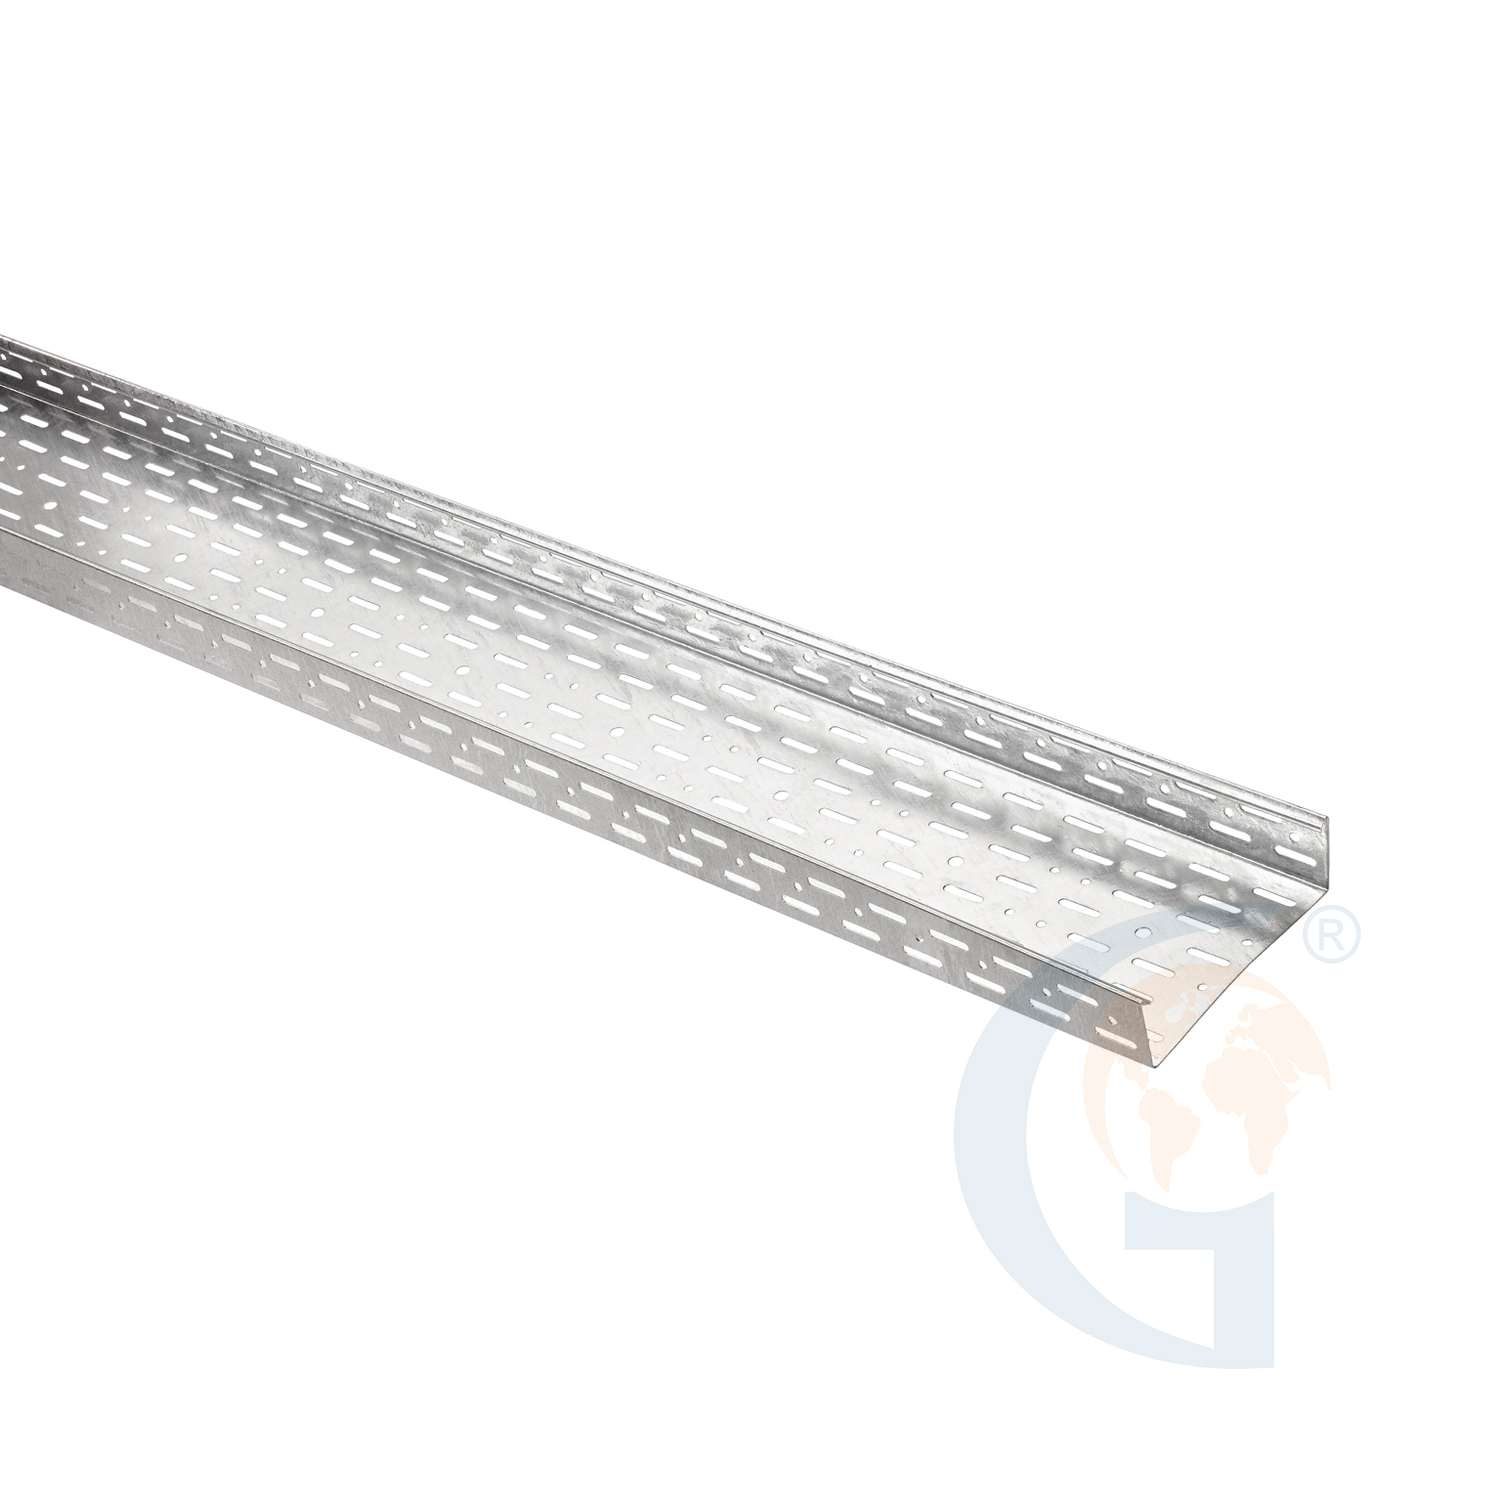 Schneider Electric CSU86015004 Stago – perfored cable tray ZM W=500,H=60,T=1 https://gesrepair.com/wp-content/uploads/2020/Schneider/Schneider_Electric_CSU86015004_.jpg